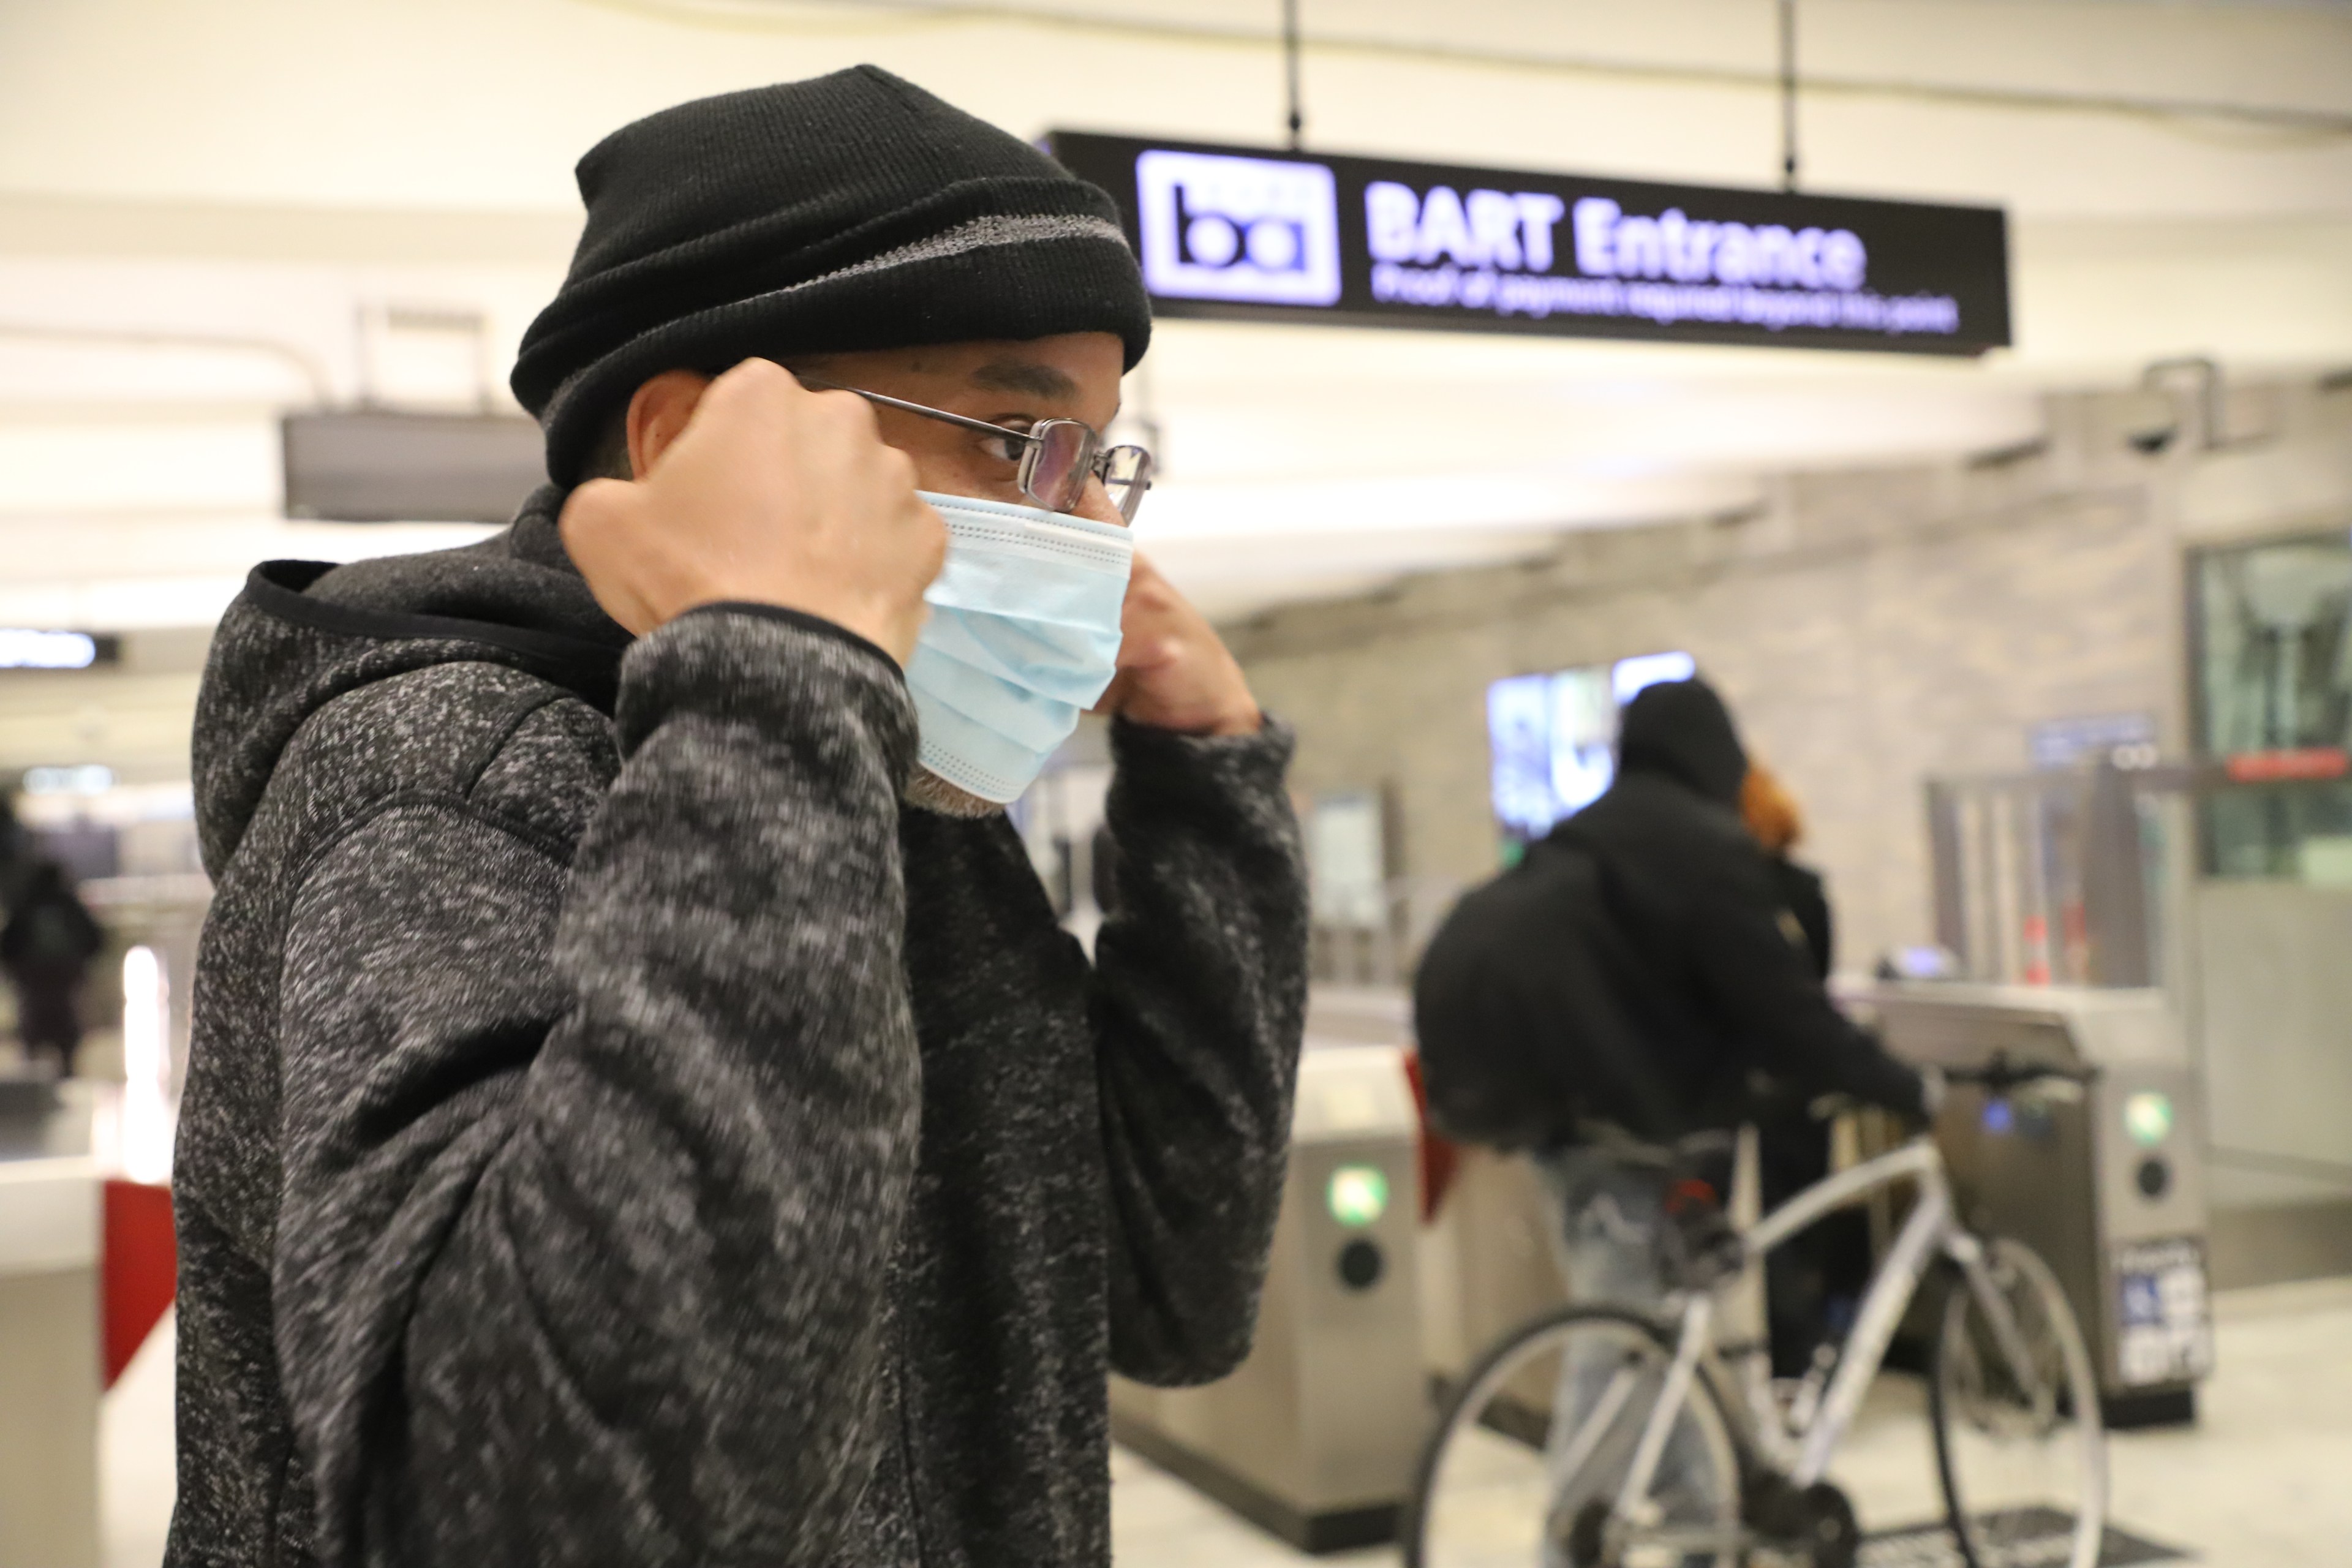 A person adjusts their mask in a station near a &quot;BART Entrance&quot; sign. Another individual with a bicycle is in the background.